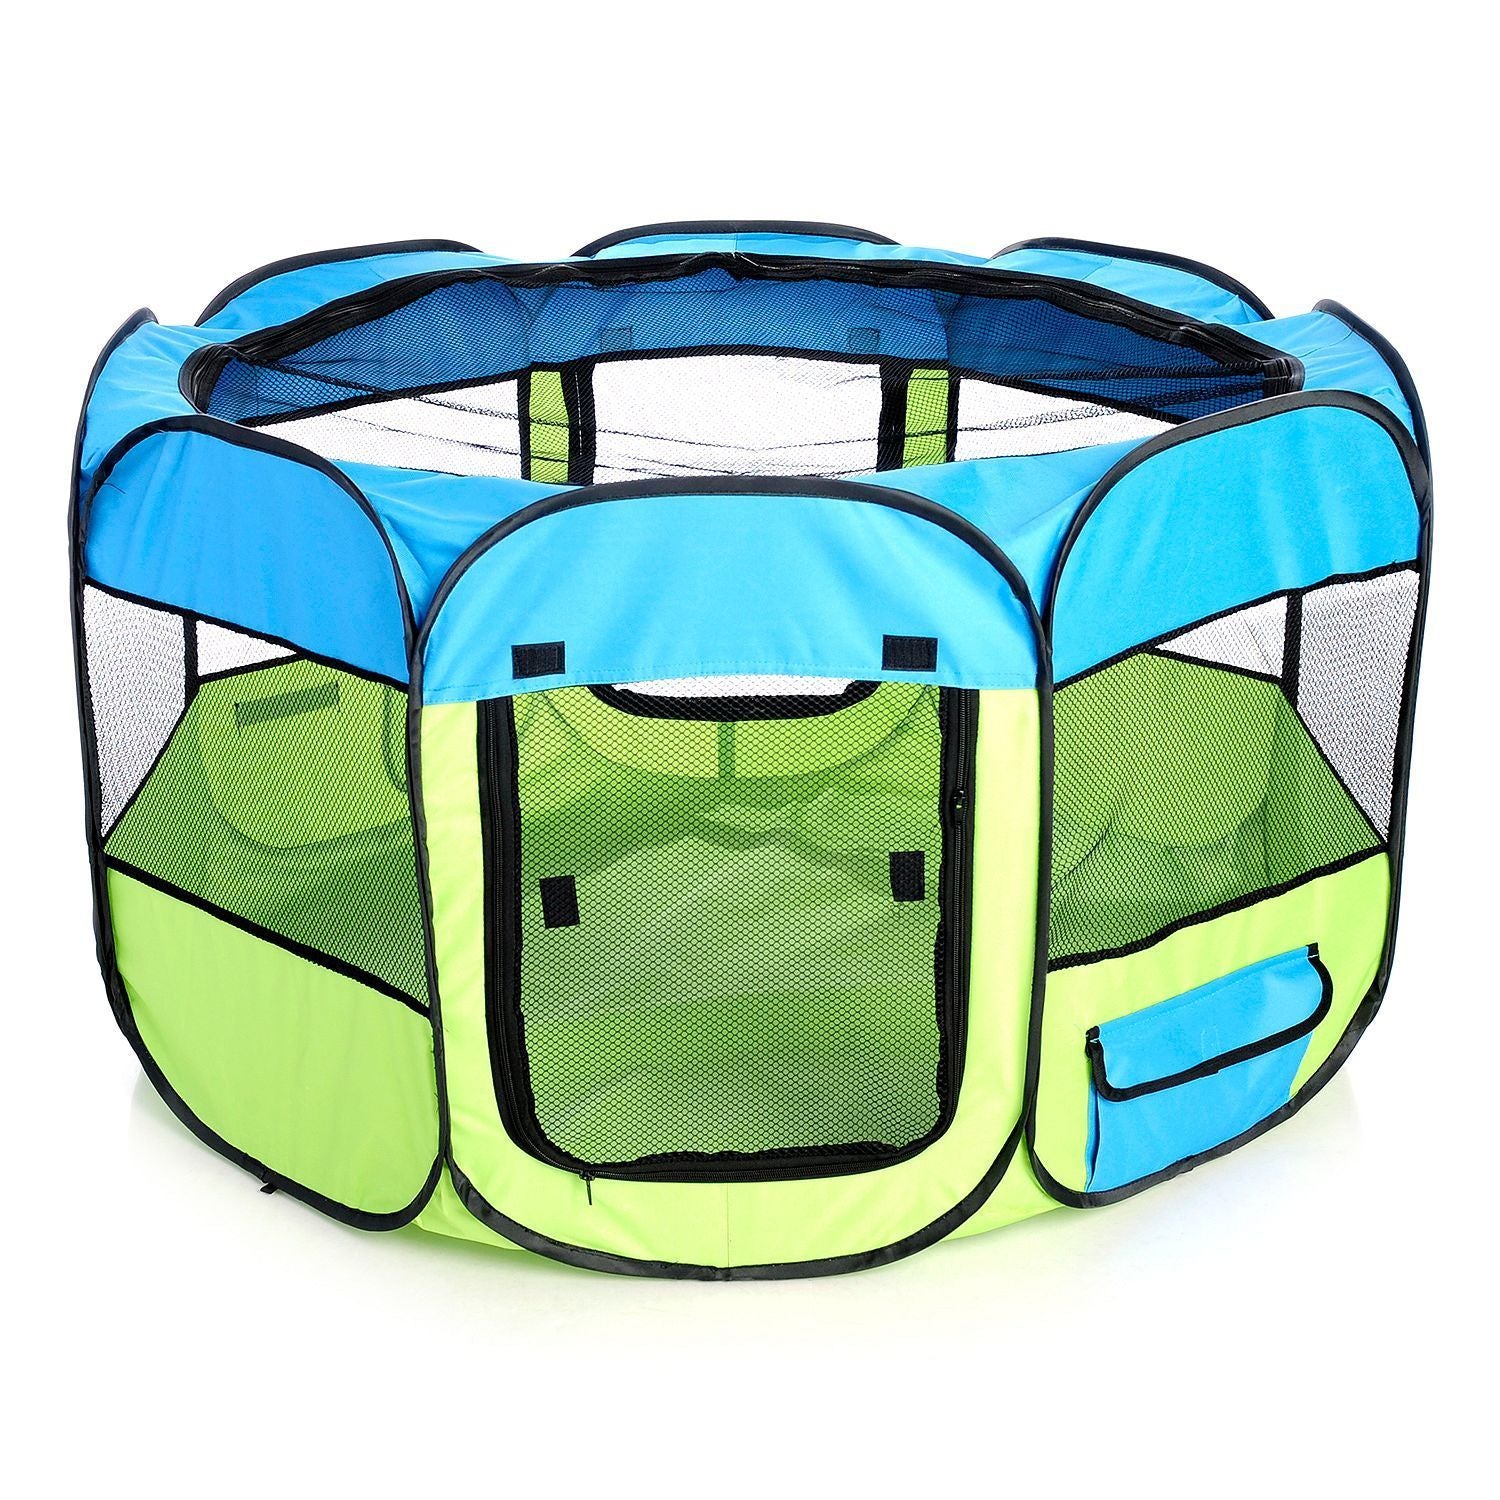 Pet Life ® 'All-Terrain' Lightweight Easy Folding Wire-Framed Collapsible Travel Pet Dog Playpen crate Medium Blue And Green